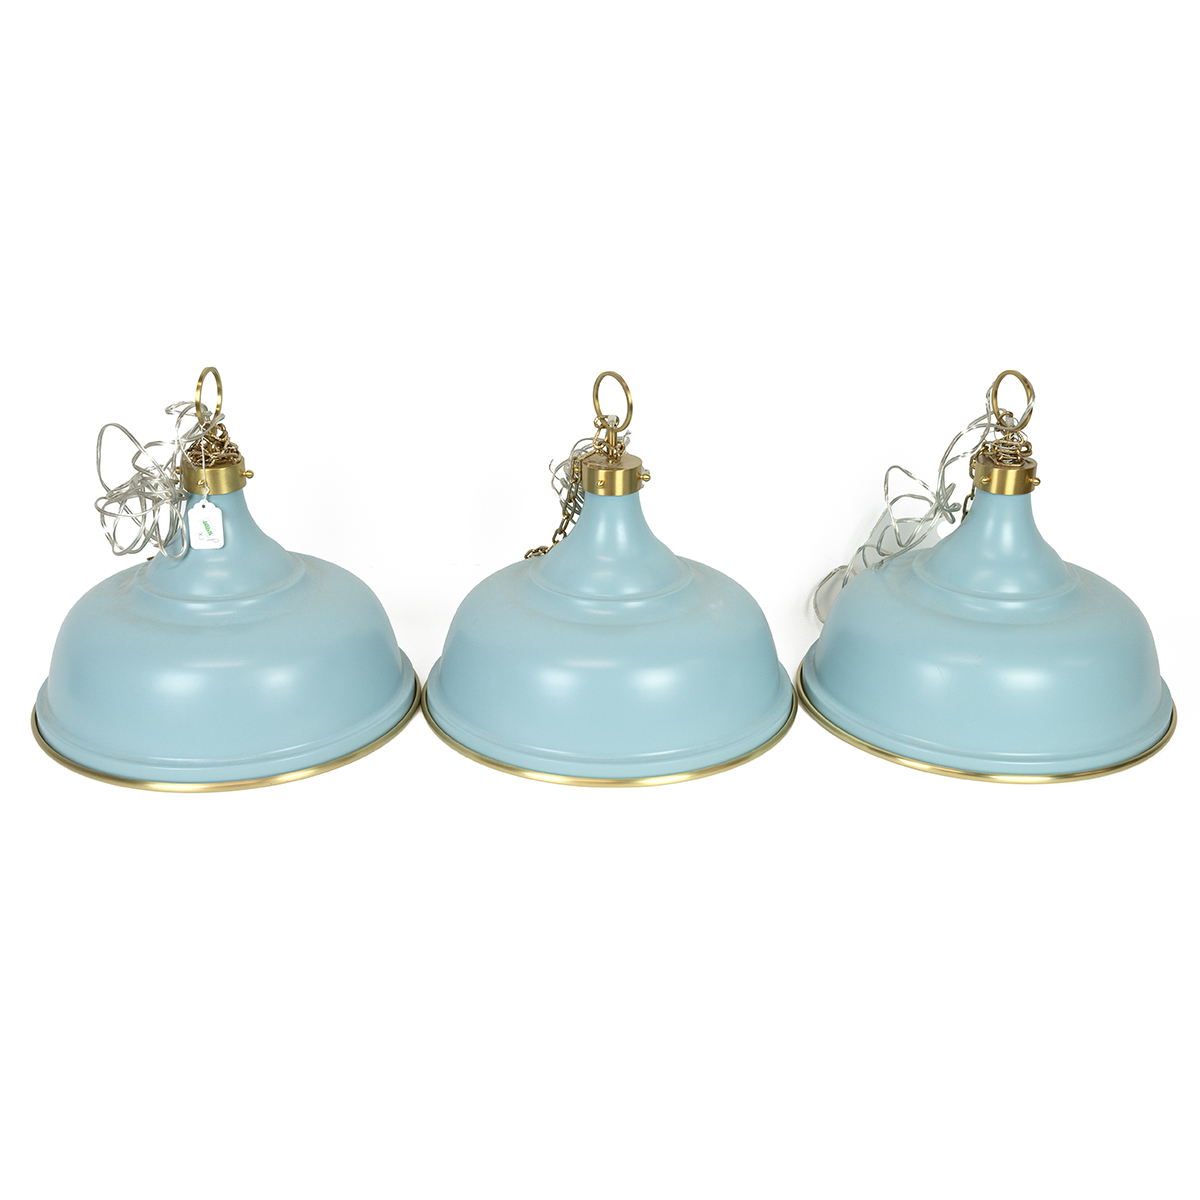 Three lacquered and painted brass pendant lights, shades with duck egg blue outer. Milk white gla...